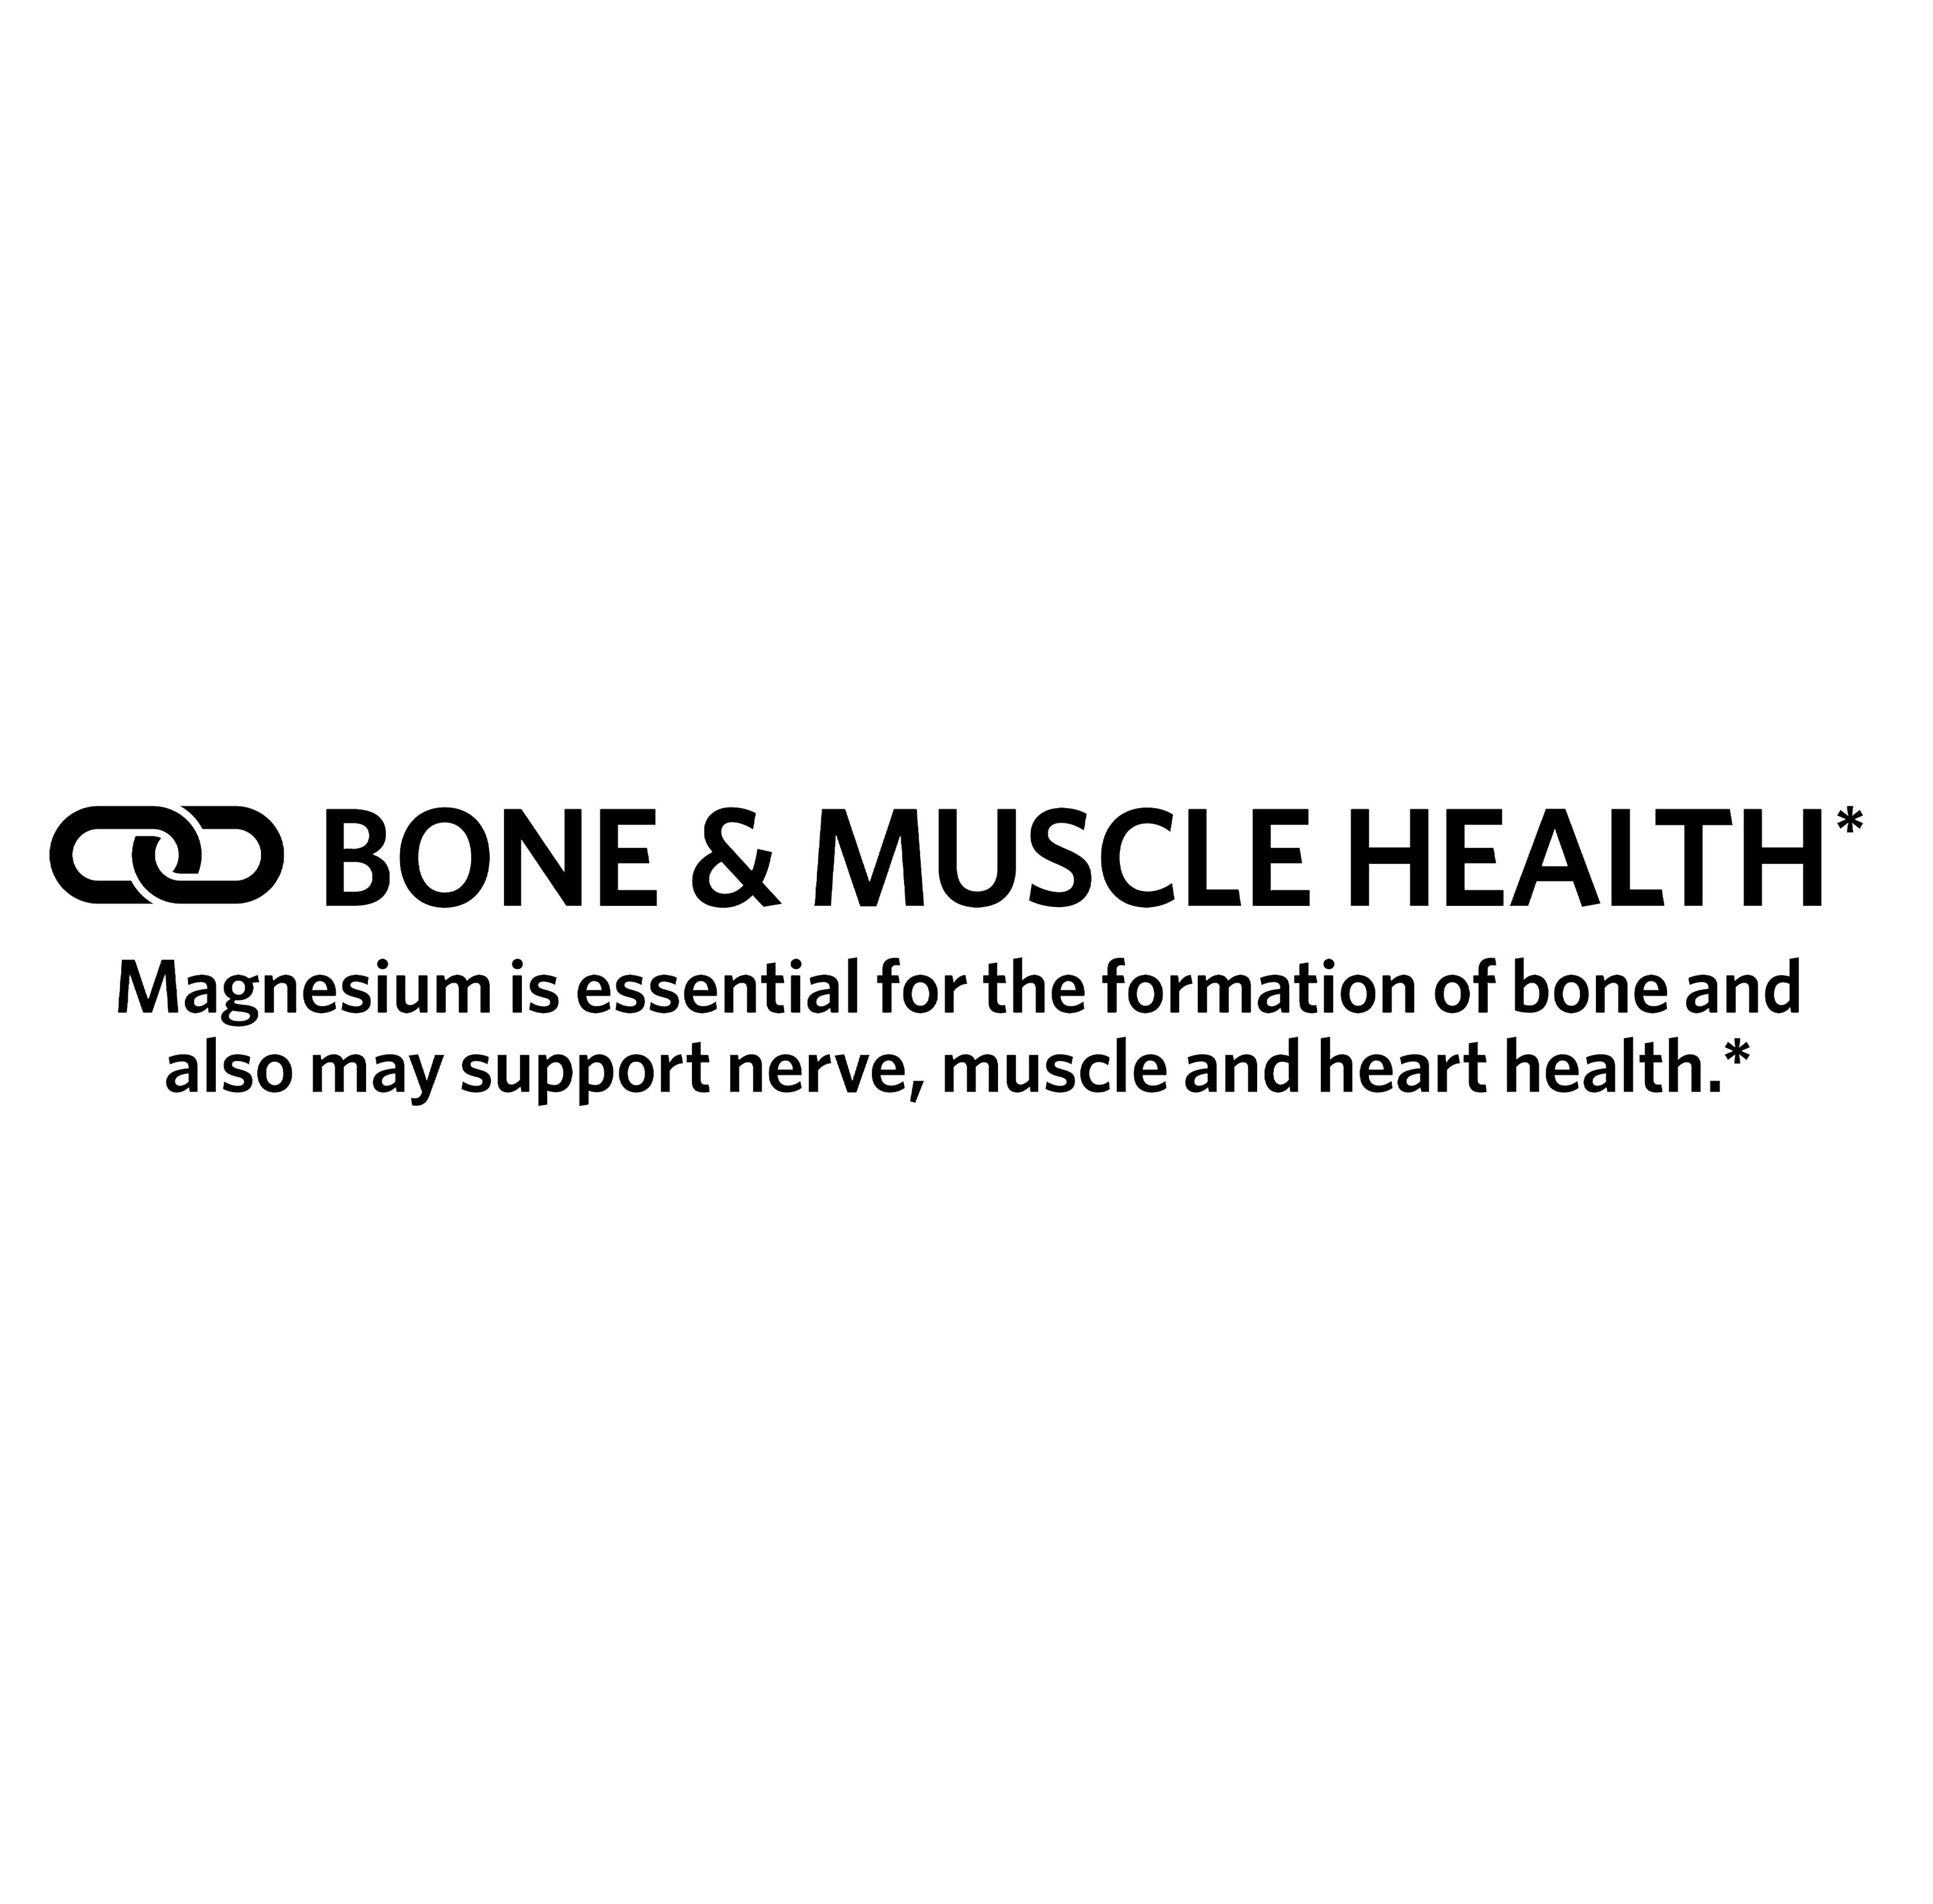 Spring Valley Magnesium Bone & Muscle Health Dietary Supplement Tablets, 400 mg, 250 Count - image 6 of 10